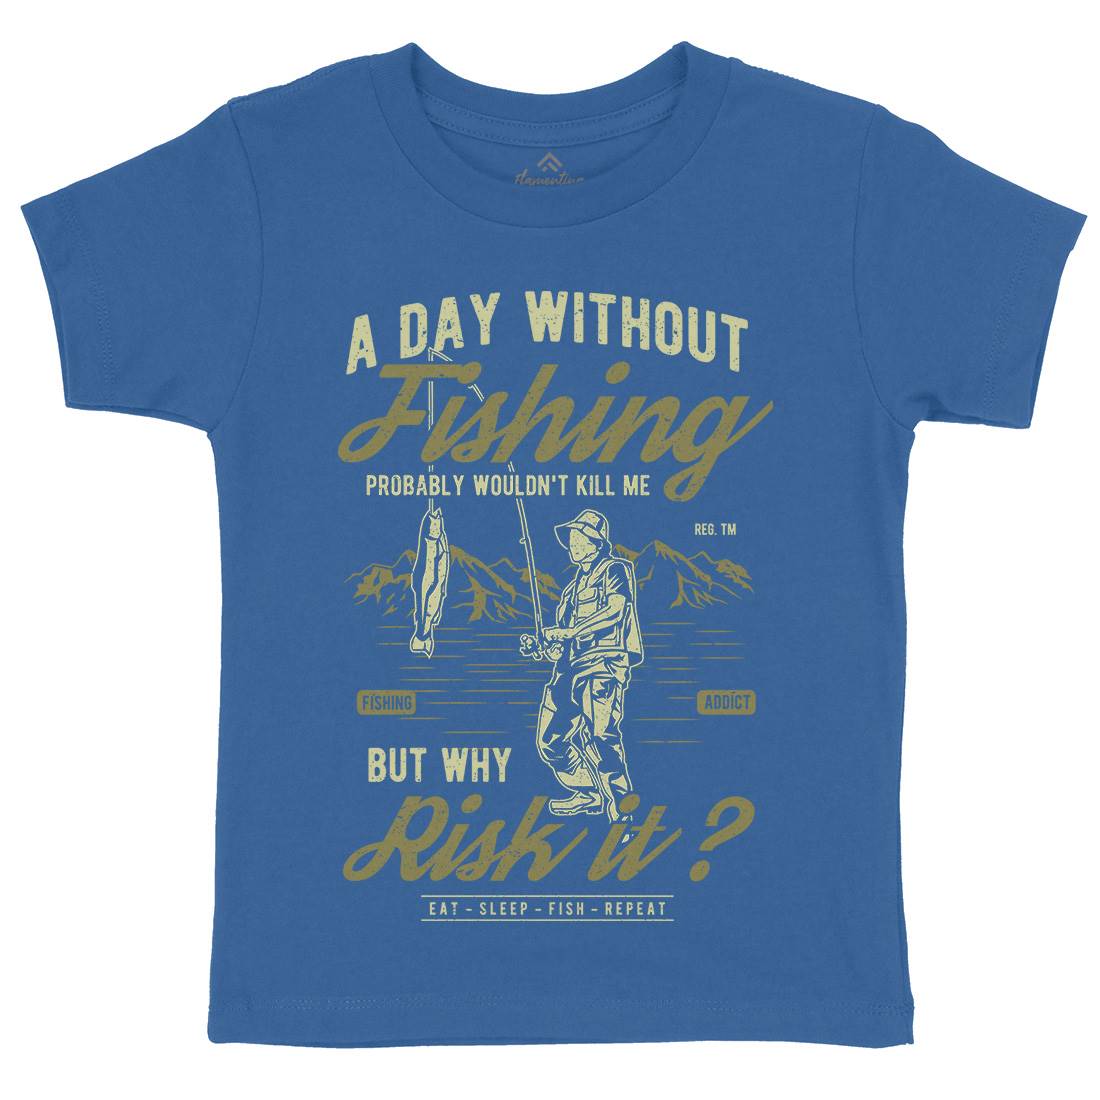 A Day Without Kids Organic Crew Neck T-Shirt Fishing A602